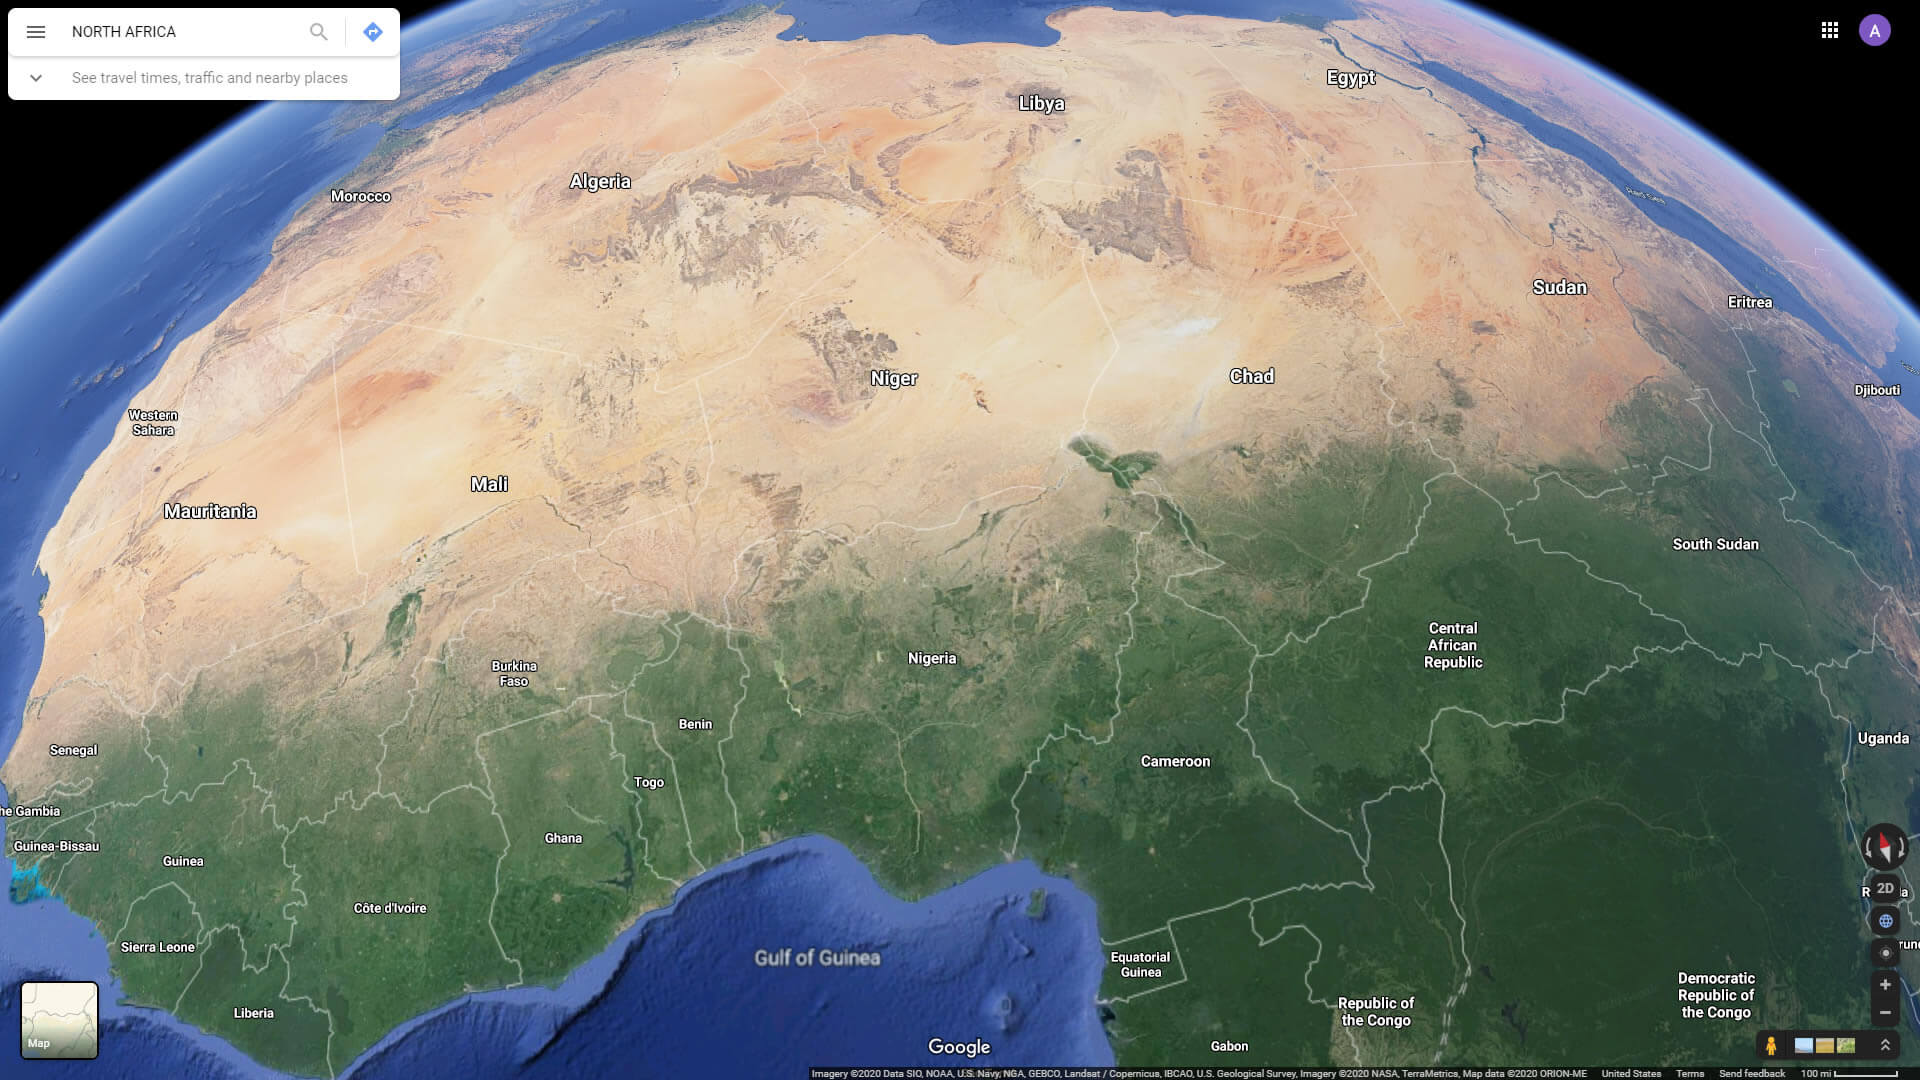 North Africa Satellite View with Countries